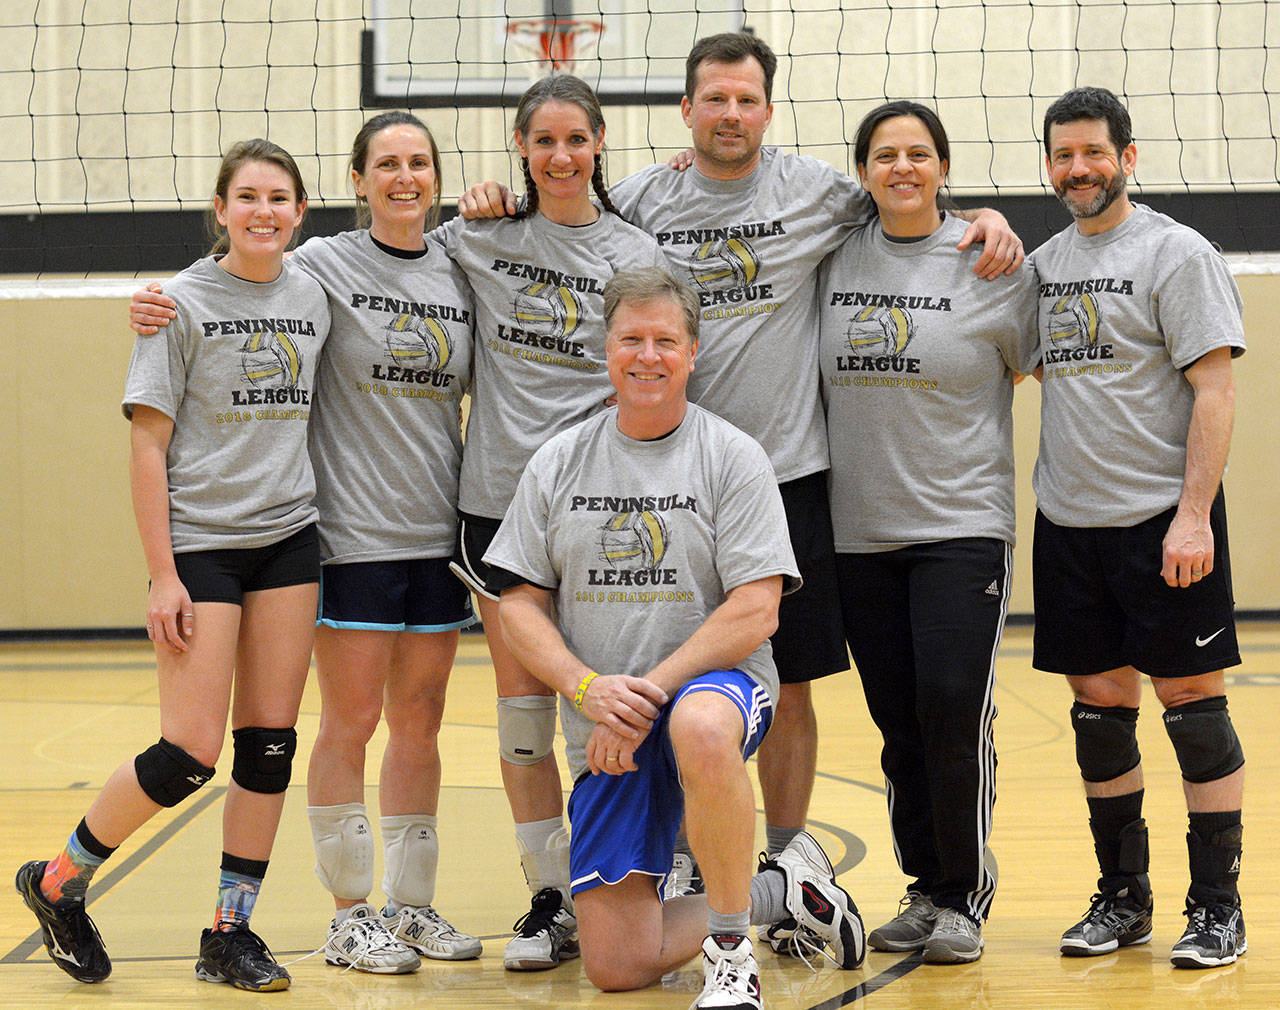 Peak Performance Therapy claims top spot in volleyball league